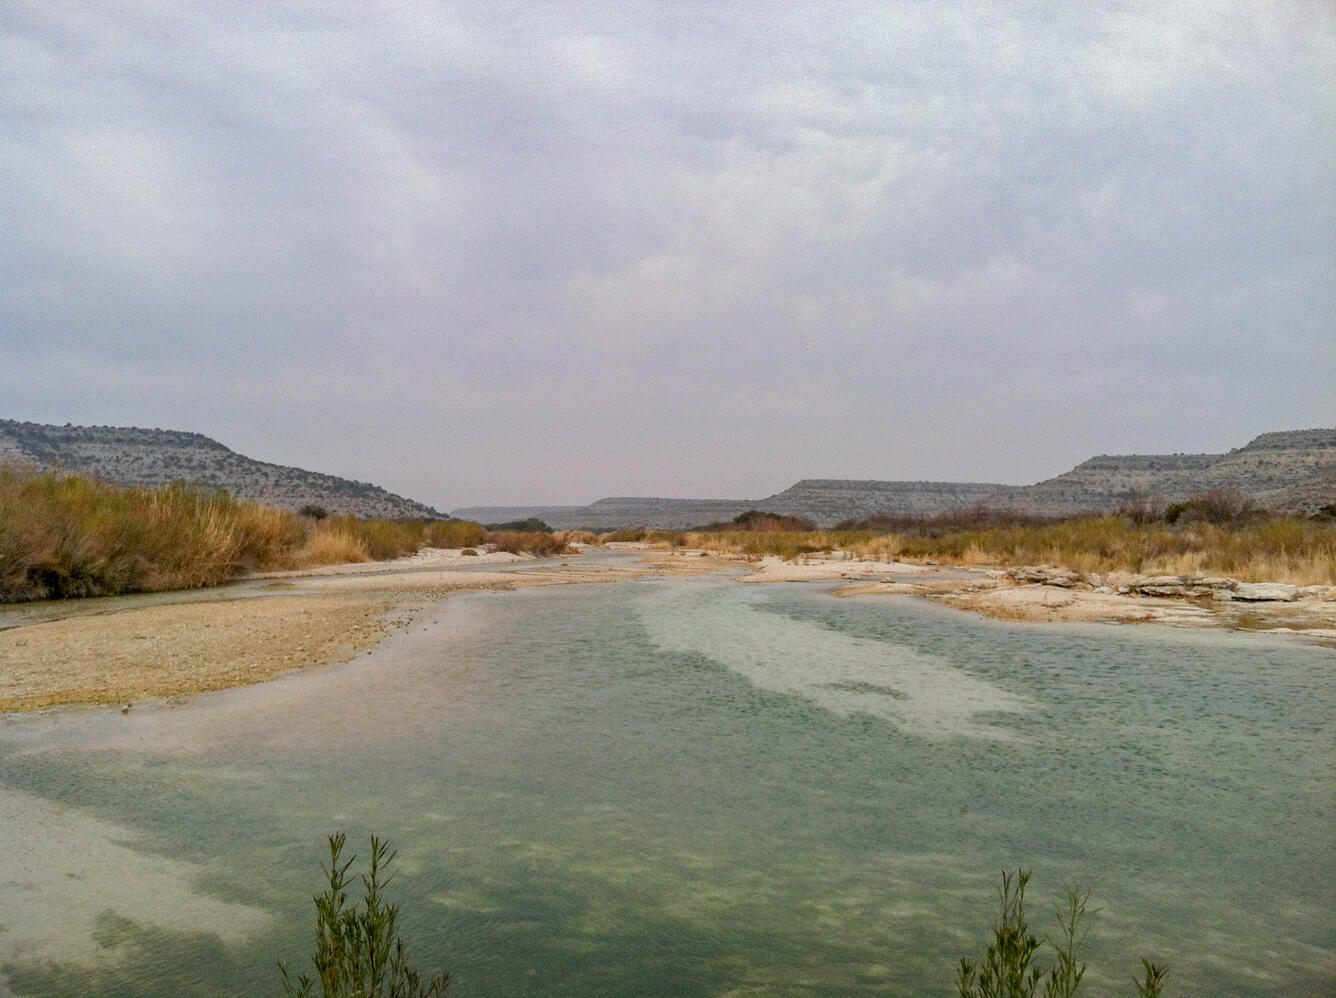 Pecos River and Independence Creek confluence